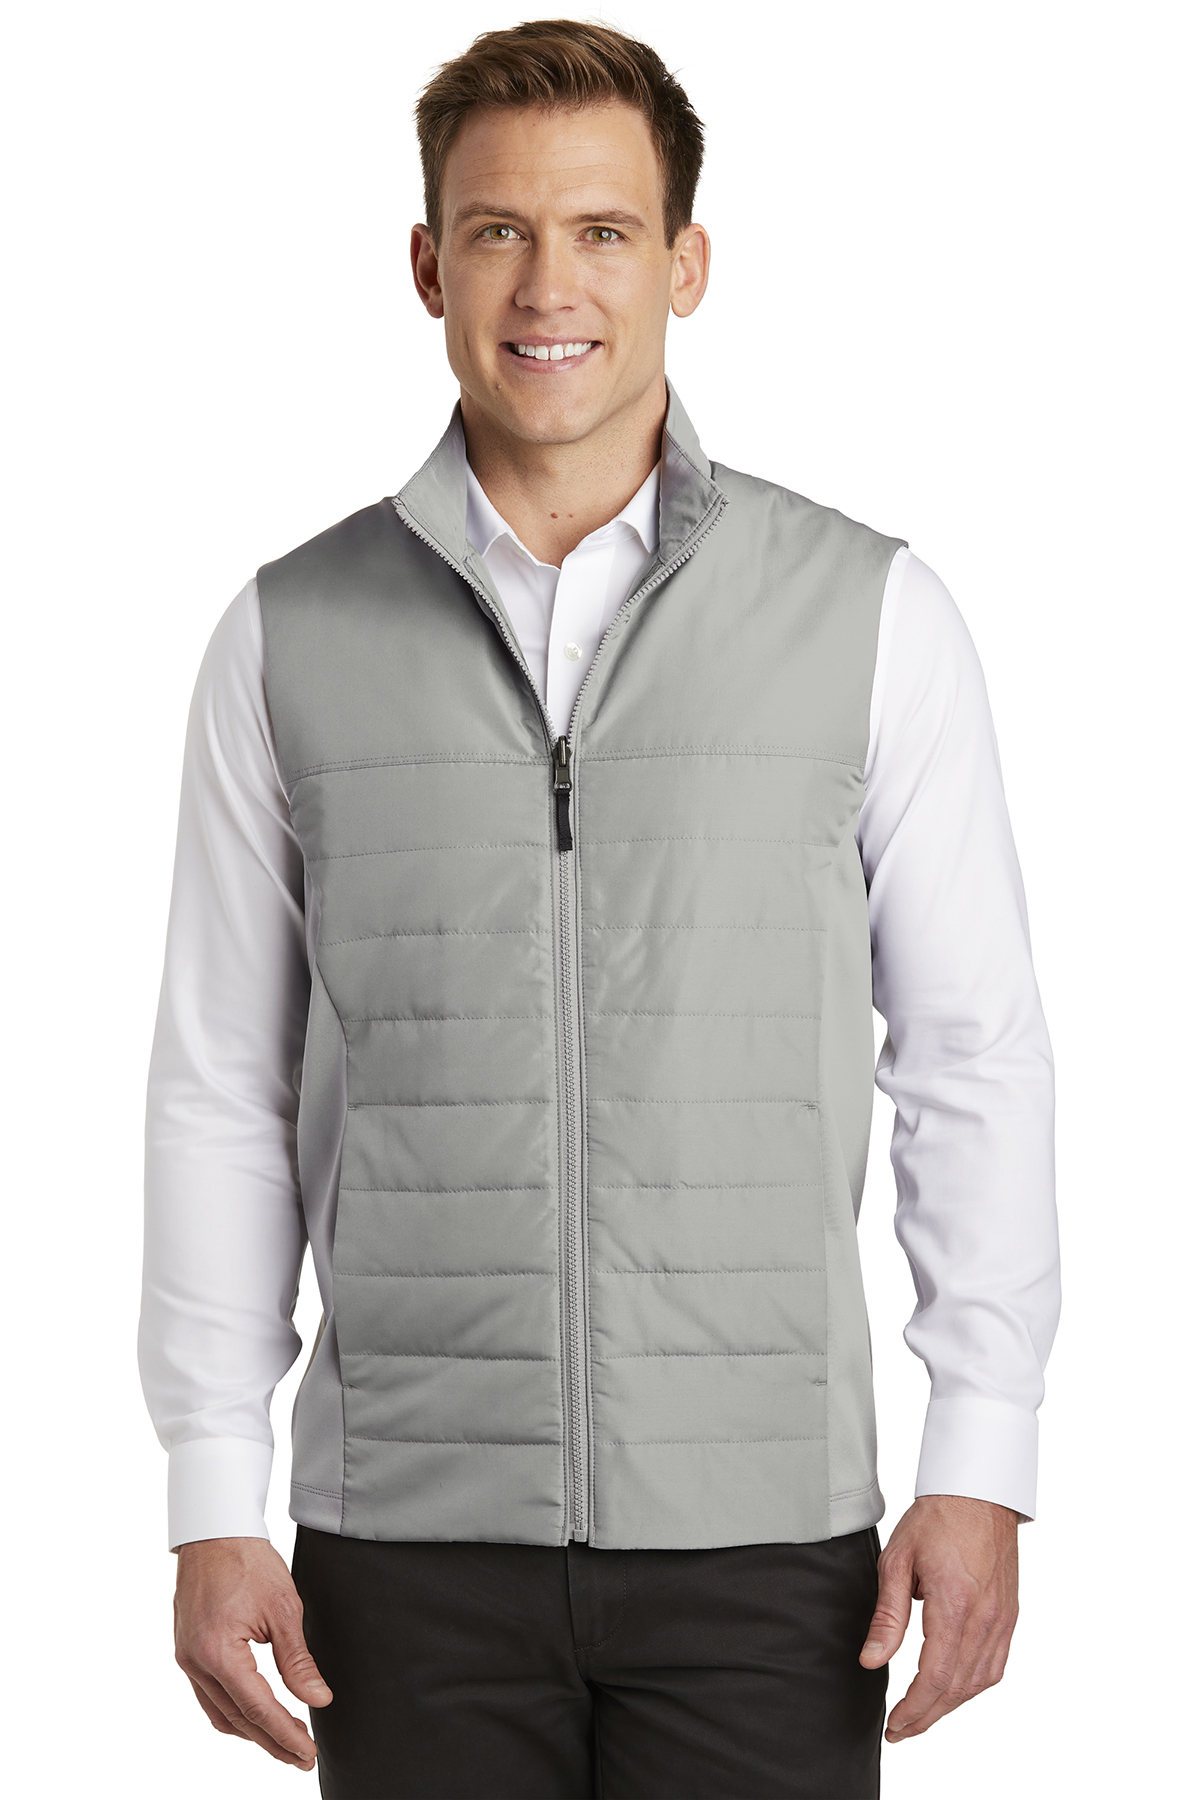 Port Authority J903 - Men's Collective Insulated Vest